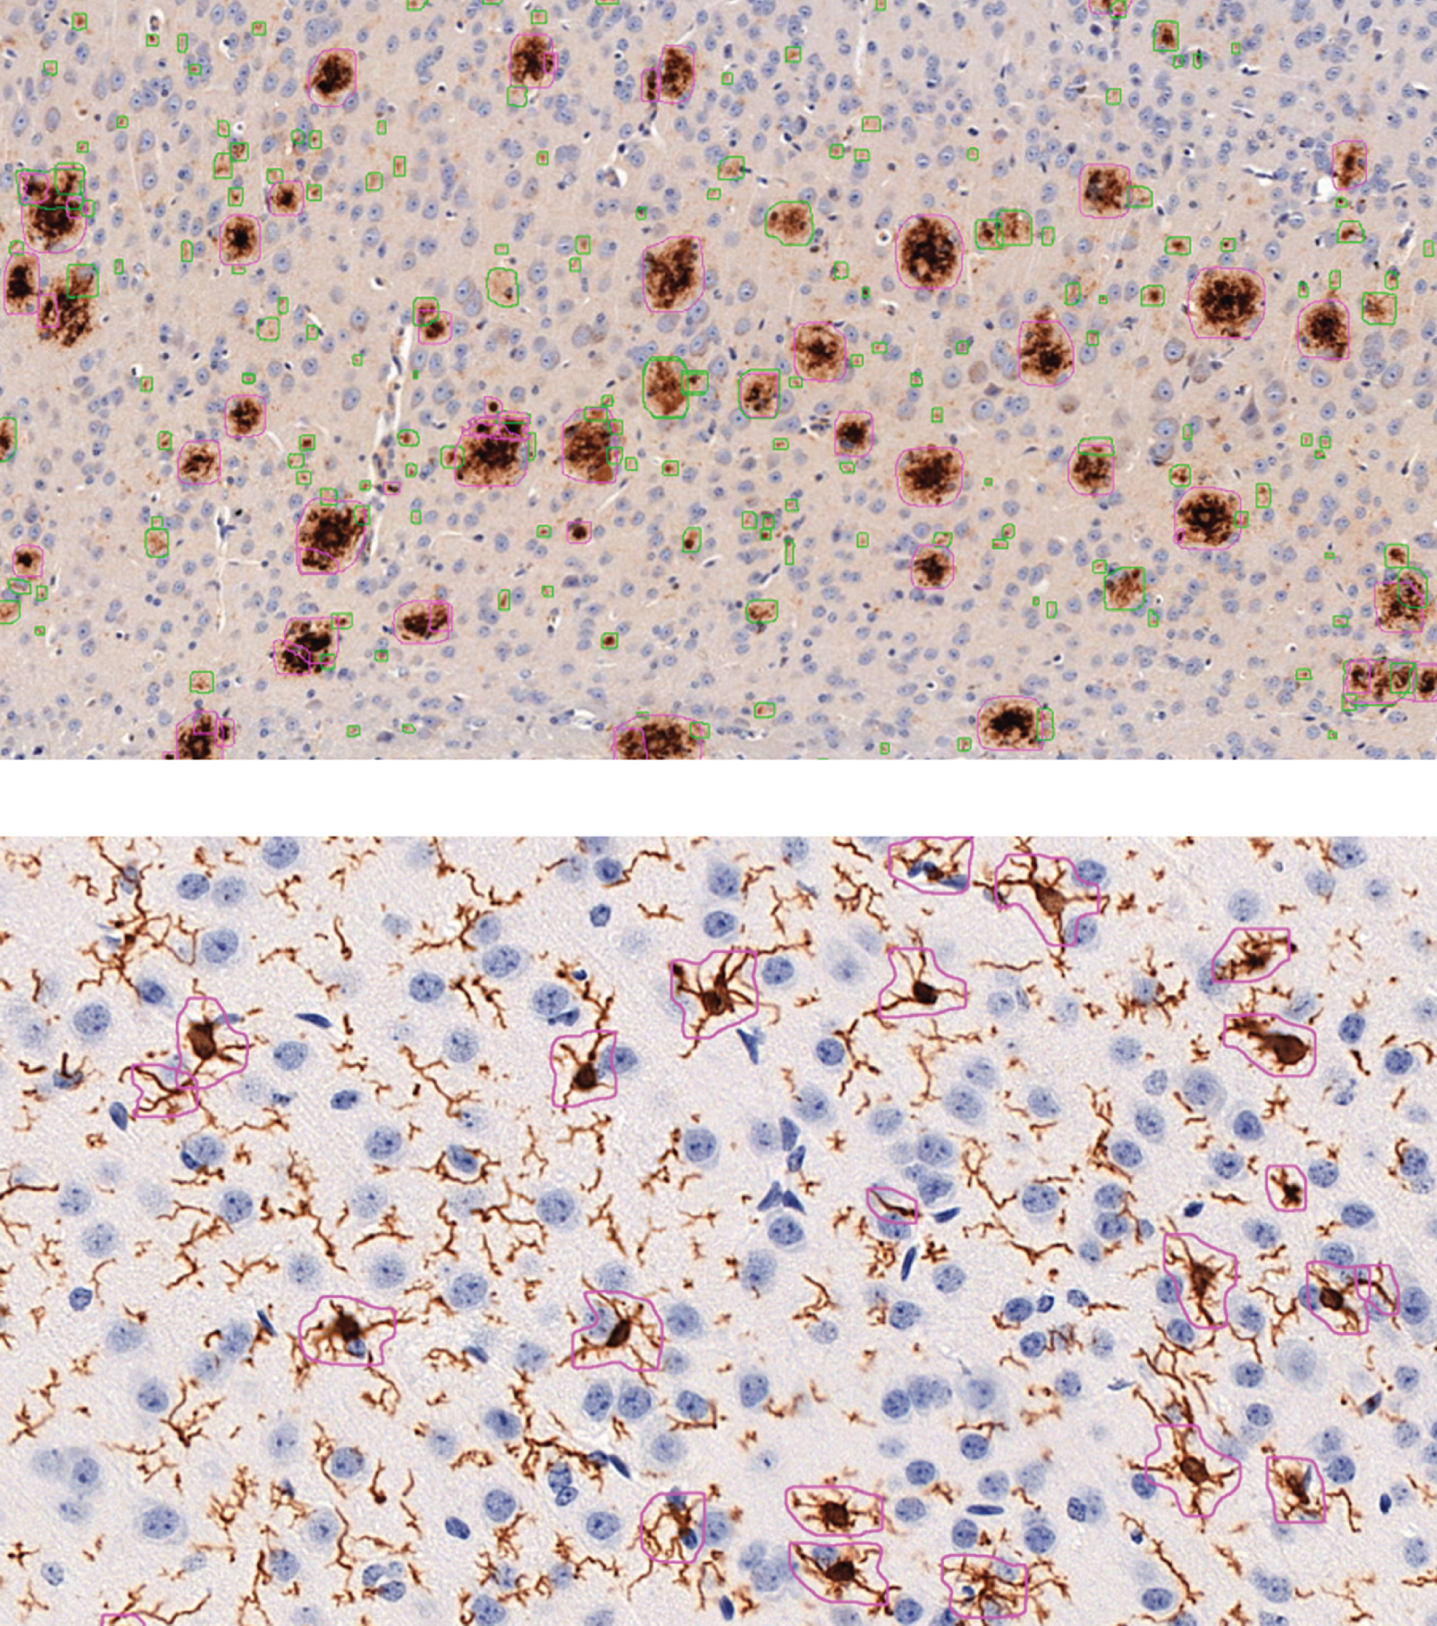 Example images of automatic analysis with DeePathology STUDIO for Aβ (above; anti-Aβ (clone 4G8) staining) and microglia (below; anti-Iba1 staining). Aβ analysis was trained to distinguish between diffuse- (green) and dense-packed (pink) plaques. Microglial analysis was set to detect only activated microglia but no isolated projections or resting microglia.